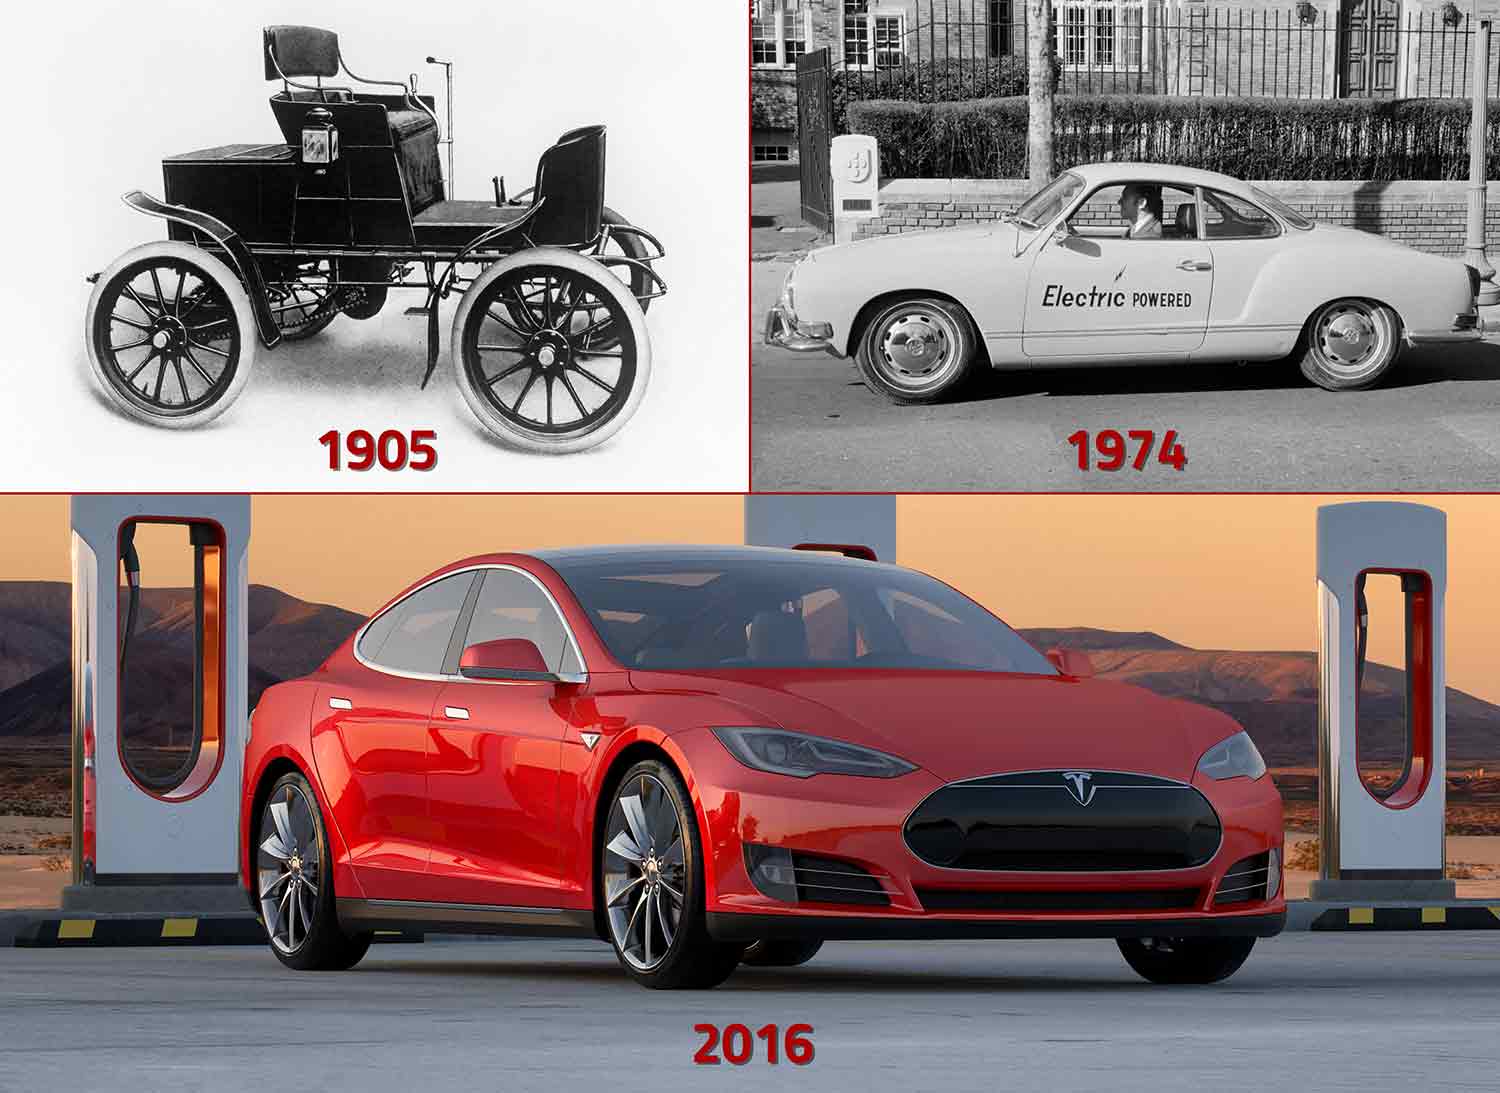 Electric cars from 1905, 1974, and 2016.